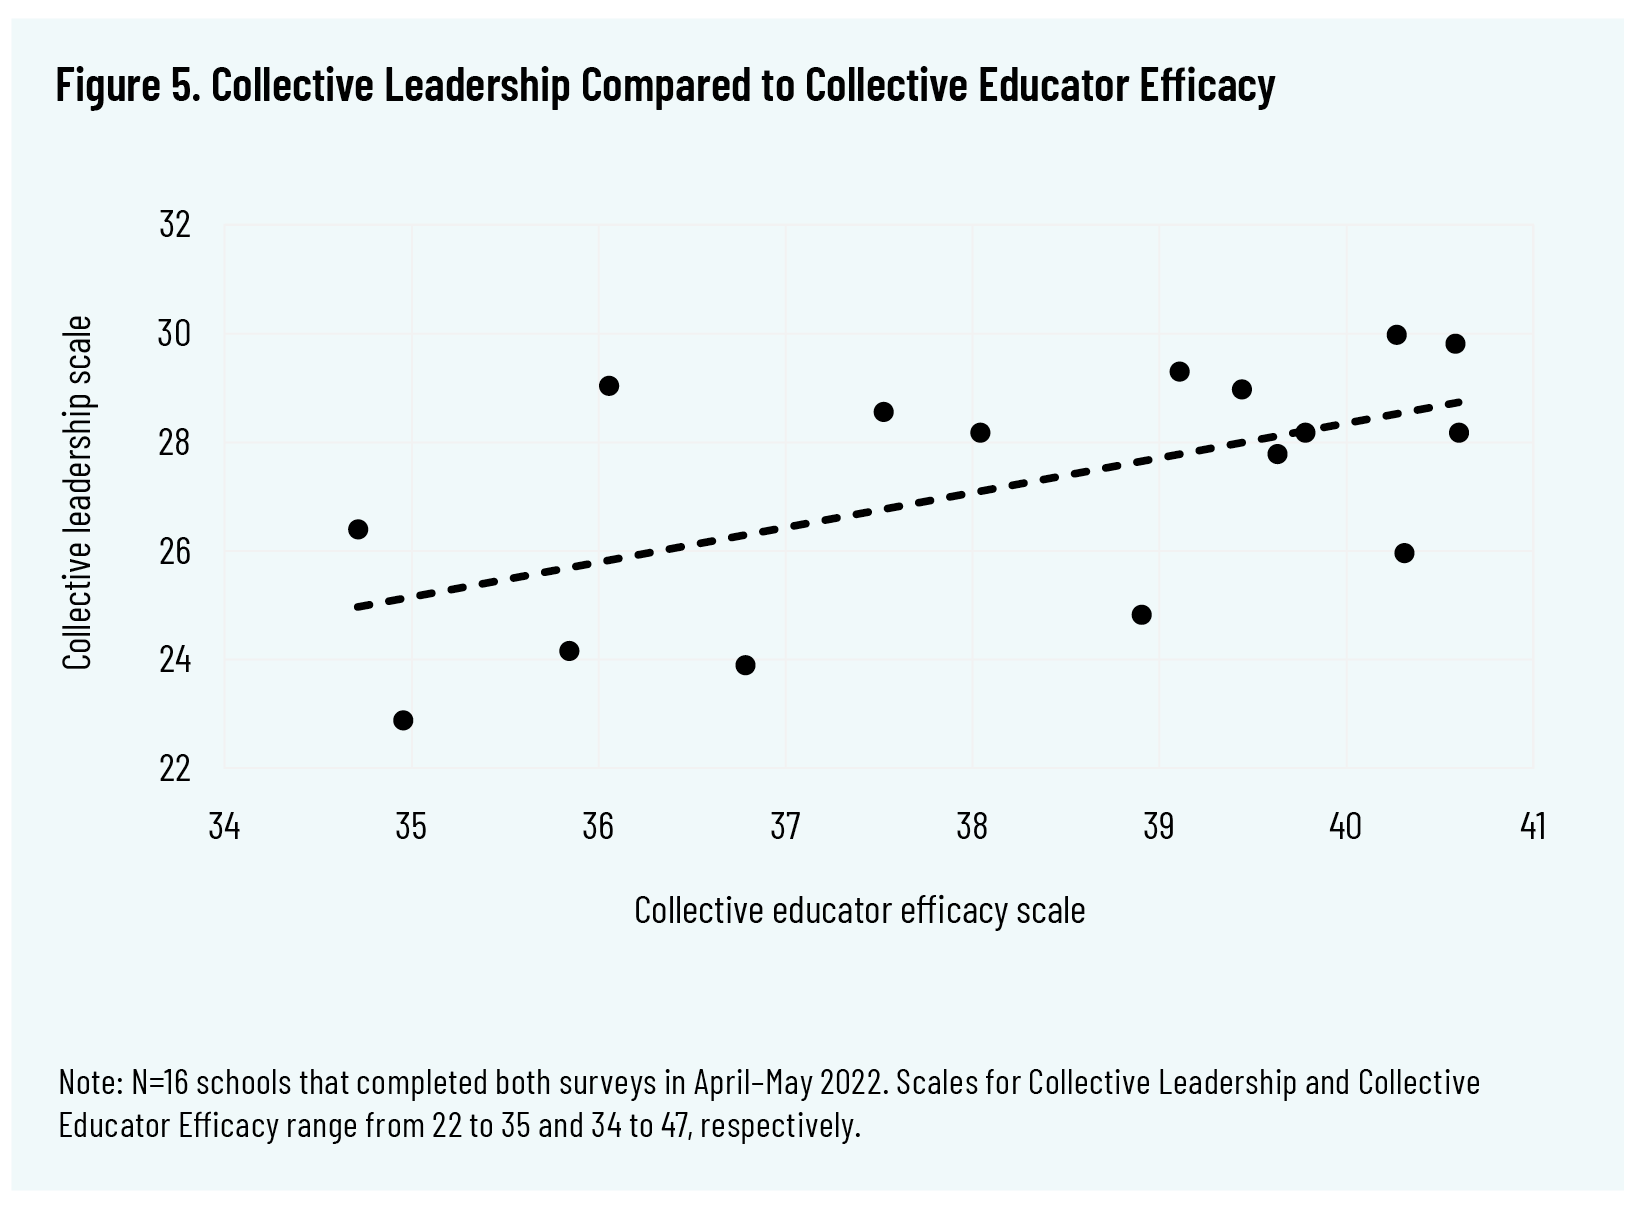 Figure 5 - Collective Leadership Compared to Collective Educator Efficacy